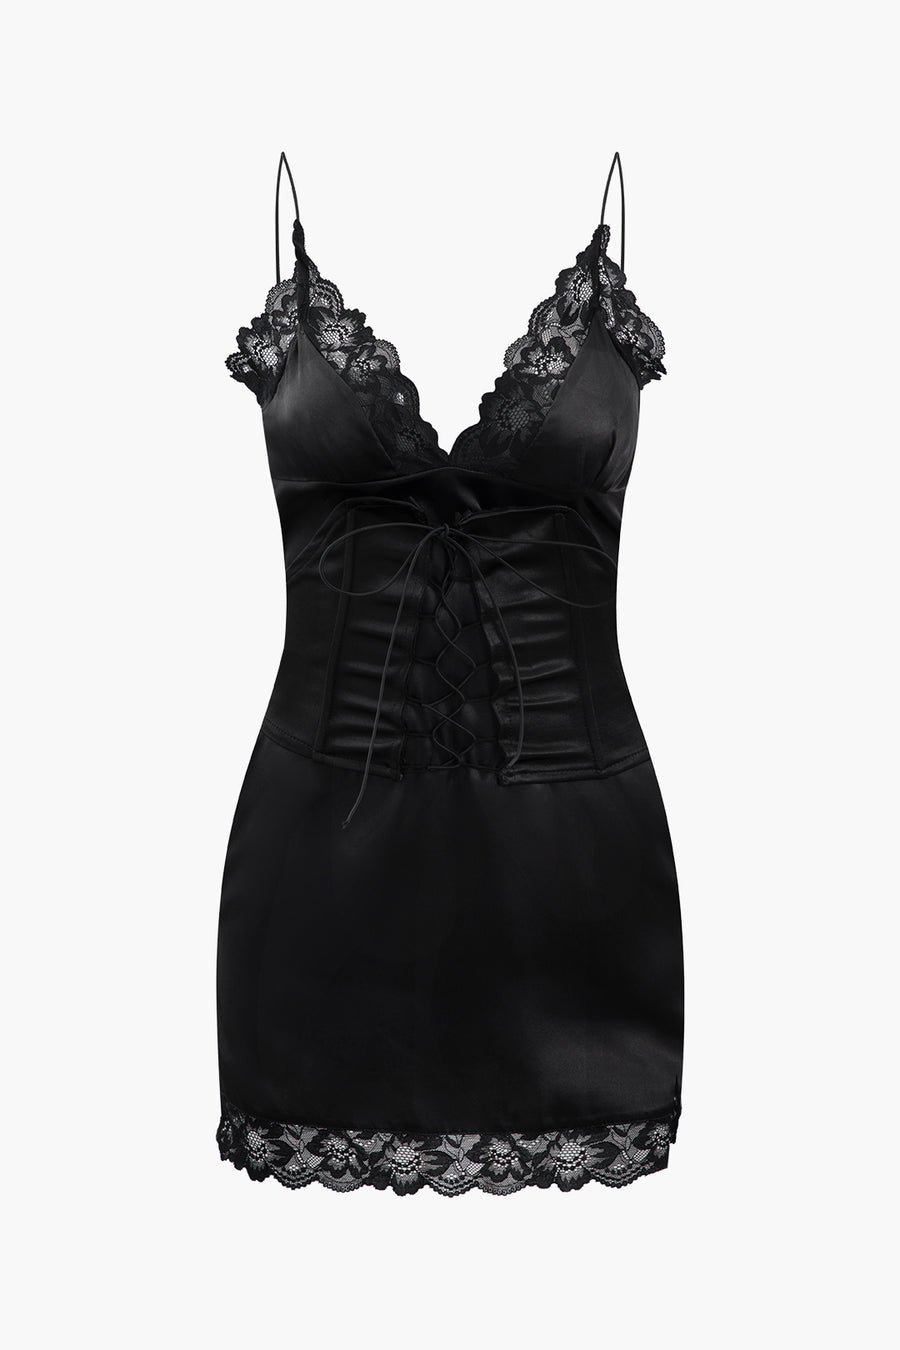 A&A Lace Satin Slip Mini Dress with Corset Style